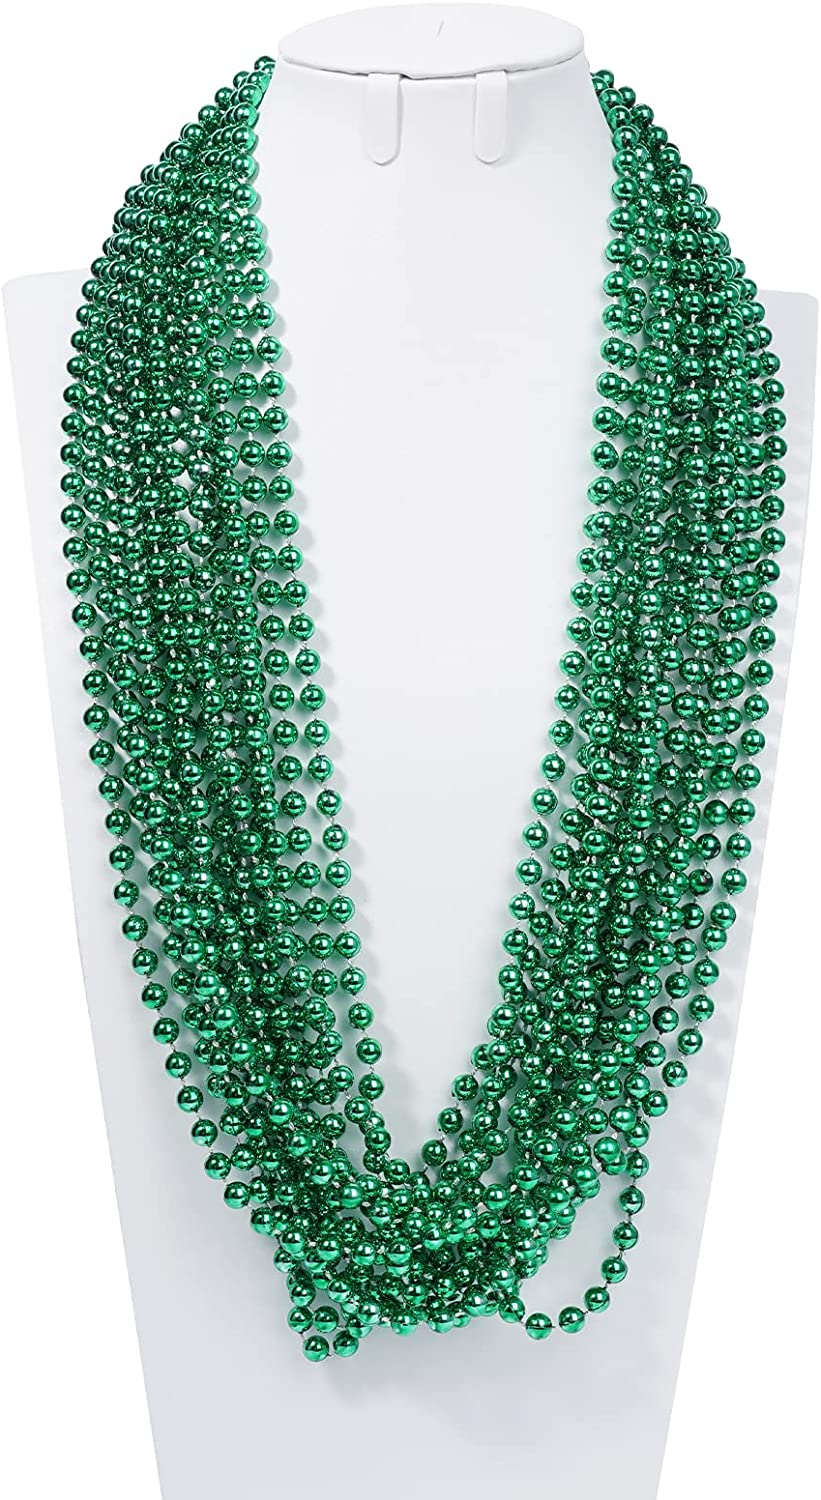 33 7mm Metallic Green Beaded Necklaces, Bulk Mardi Gras Party Beads  Necklaces, Holiday Beaded Costume Necklace for Party (Green, 12 Pack) 